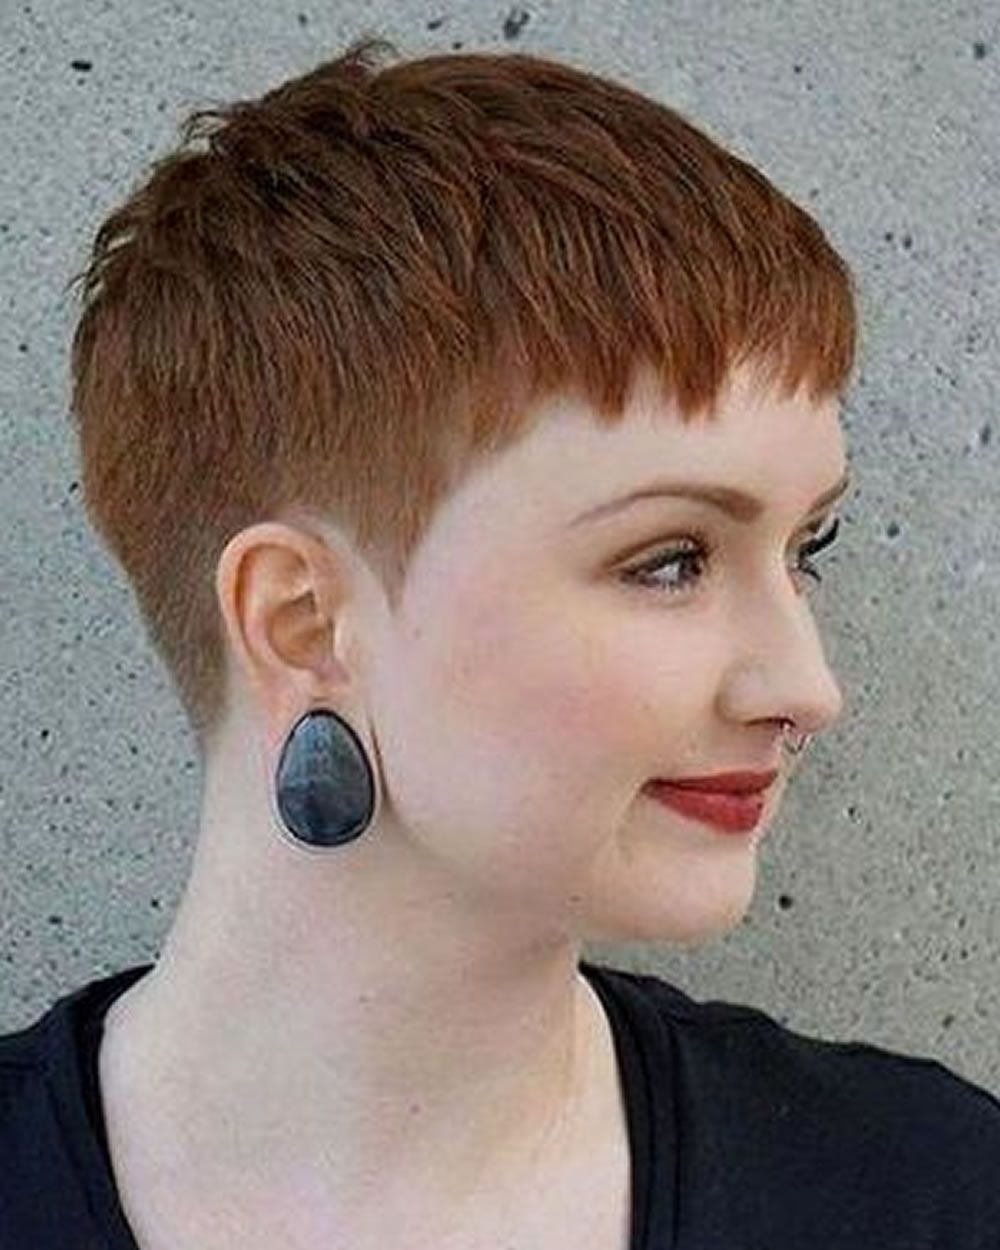 Hairstyles For Round Face And Thin Hair 2018 For Most Recent Super Short Pixie Hairstyles For Round Faces (View 4 of 15)